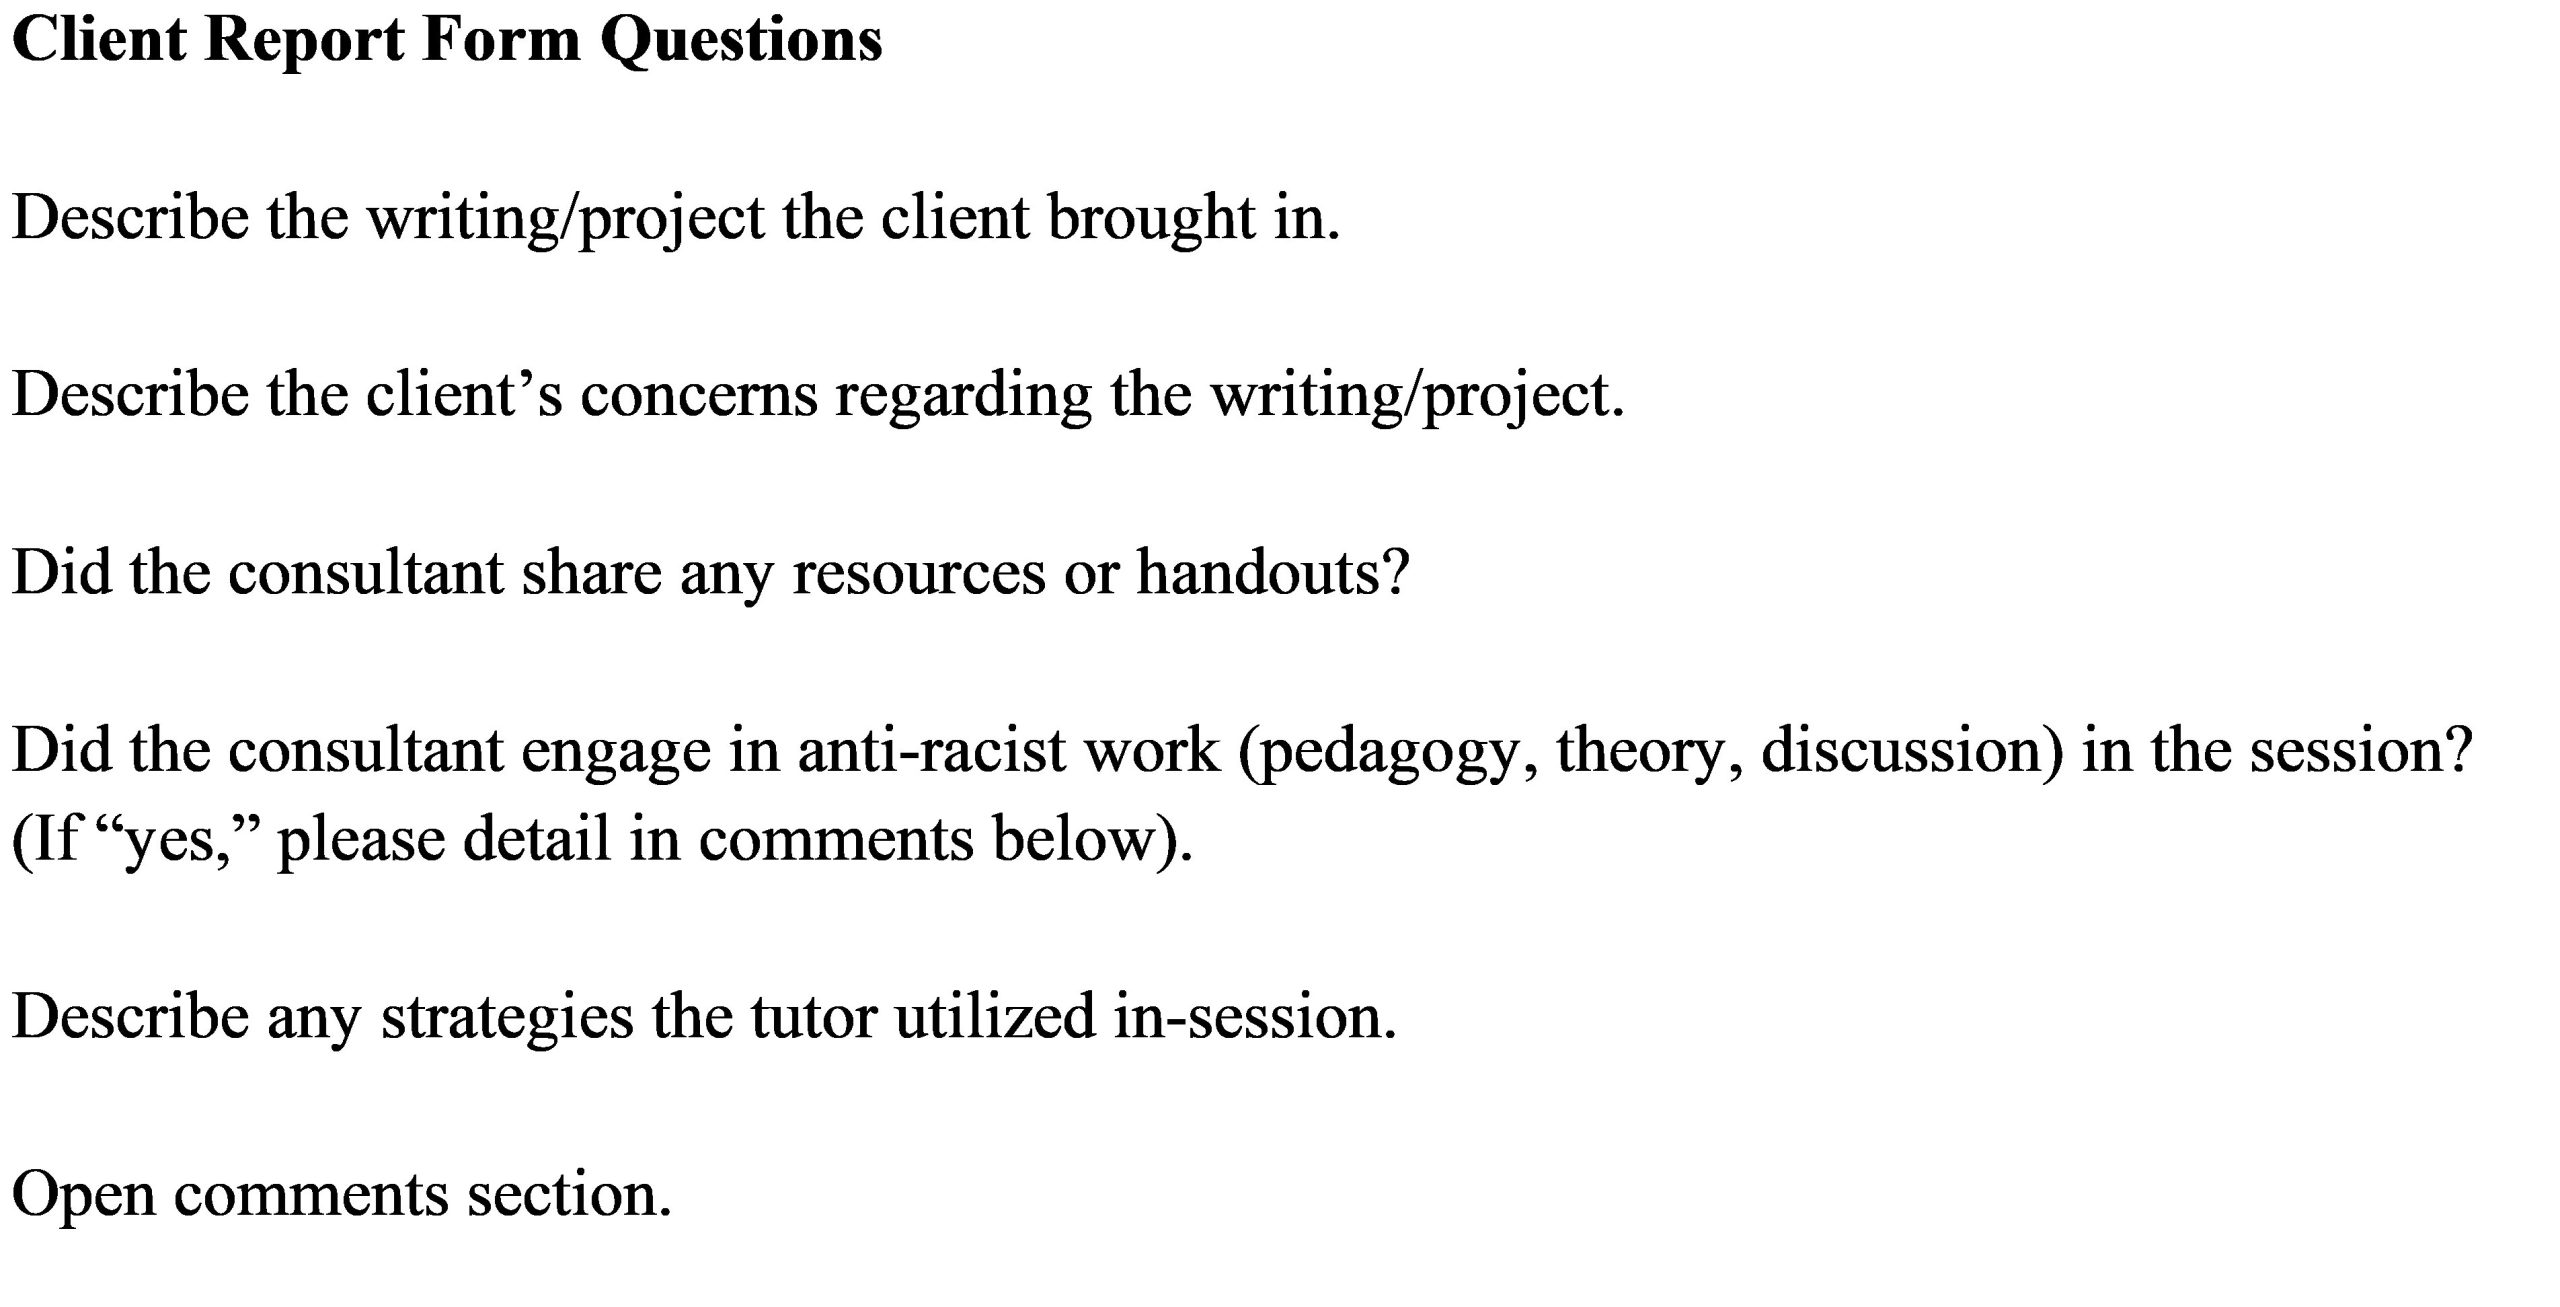 Image showing post-session client report form questions including: project worked on, client's concerns, consultant sharing resources, consultant engaging in anti-racist work and other strategies, and open-ended comments.